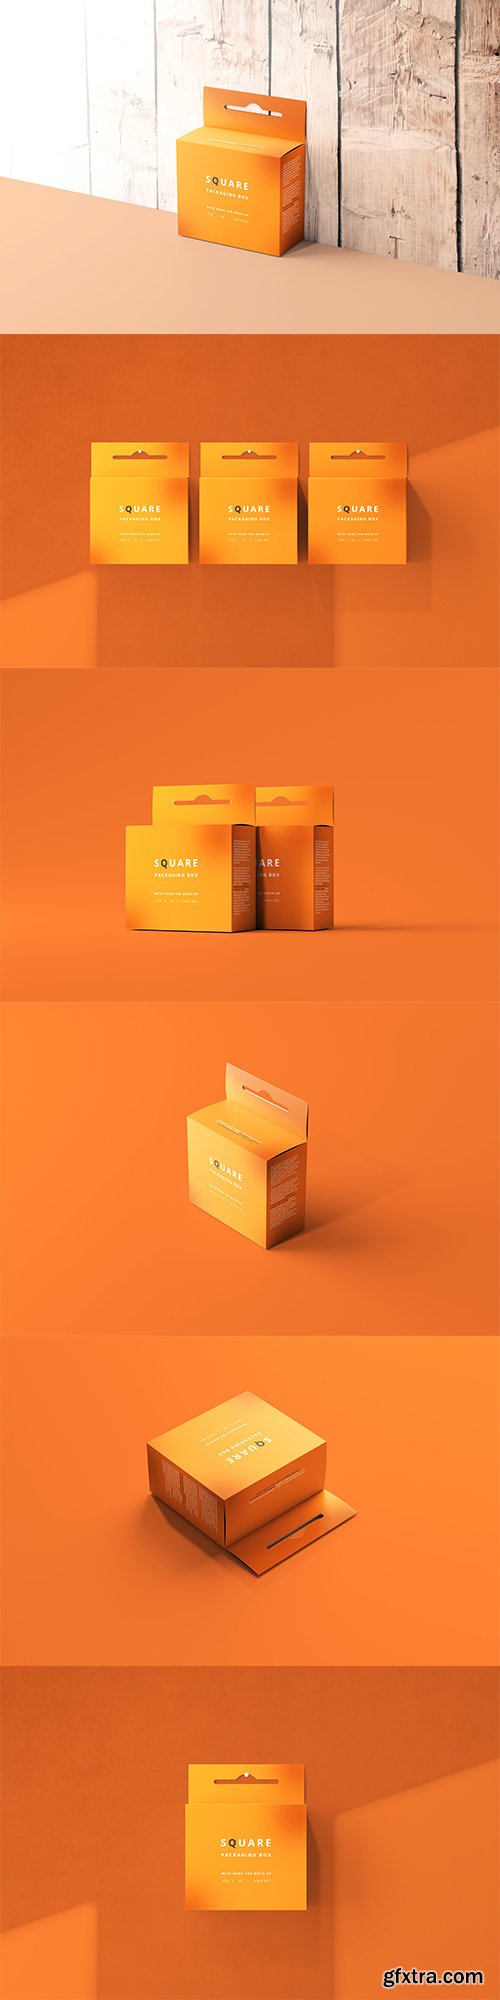 Mockup of square packaging box